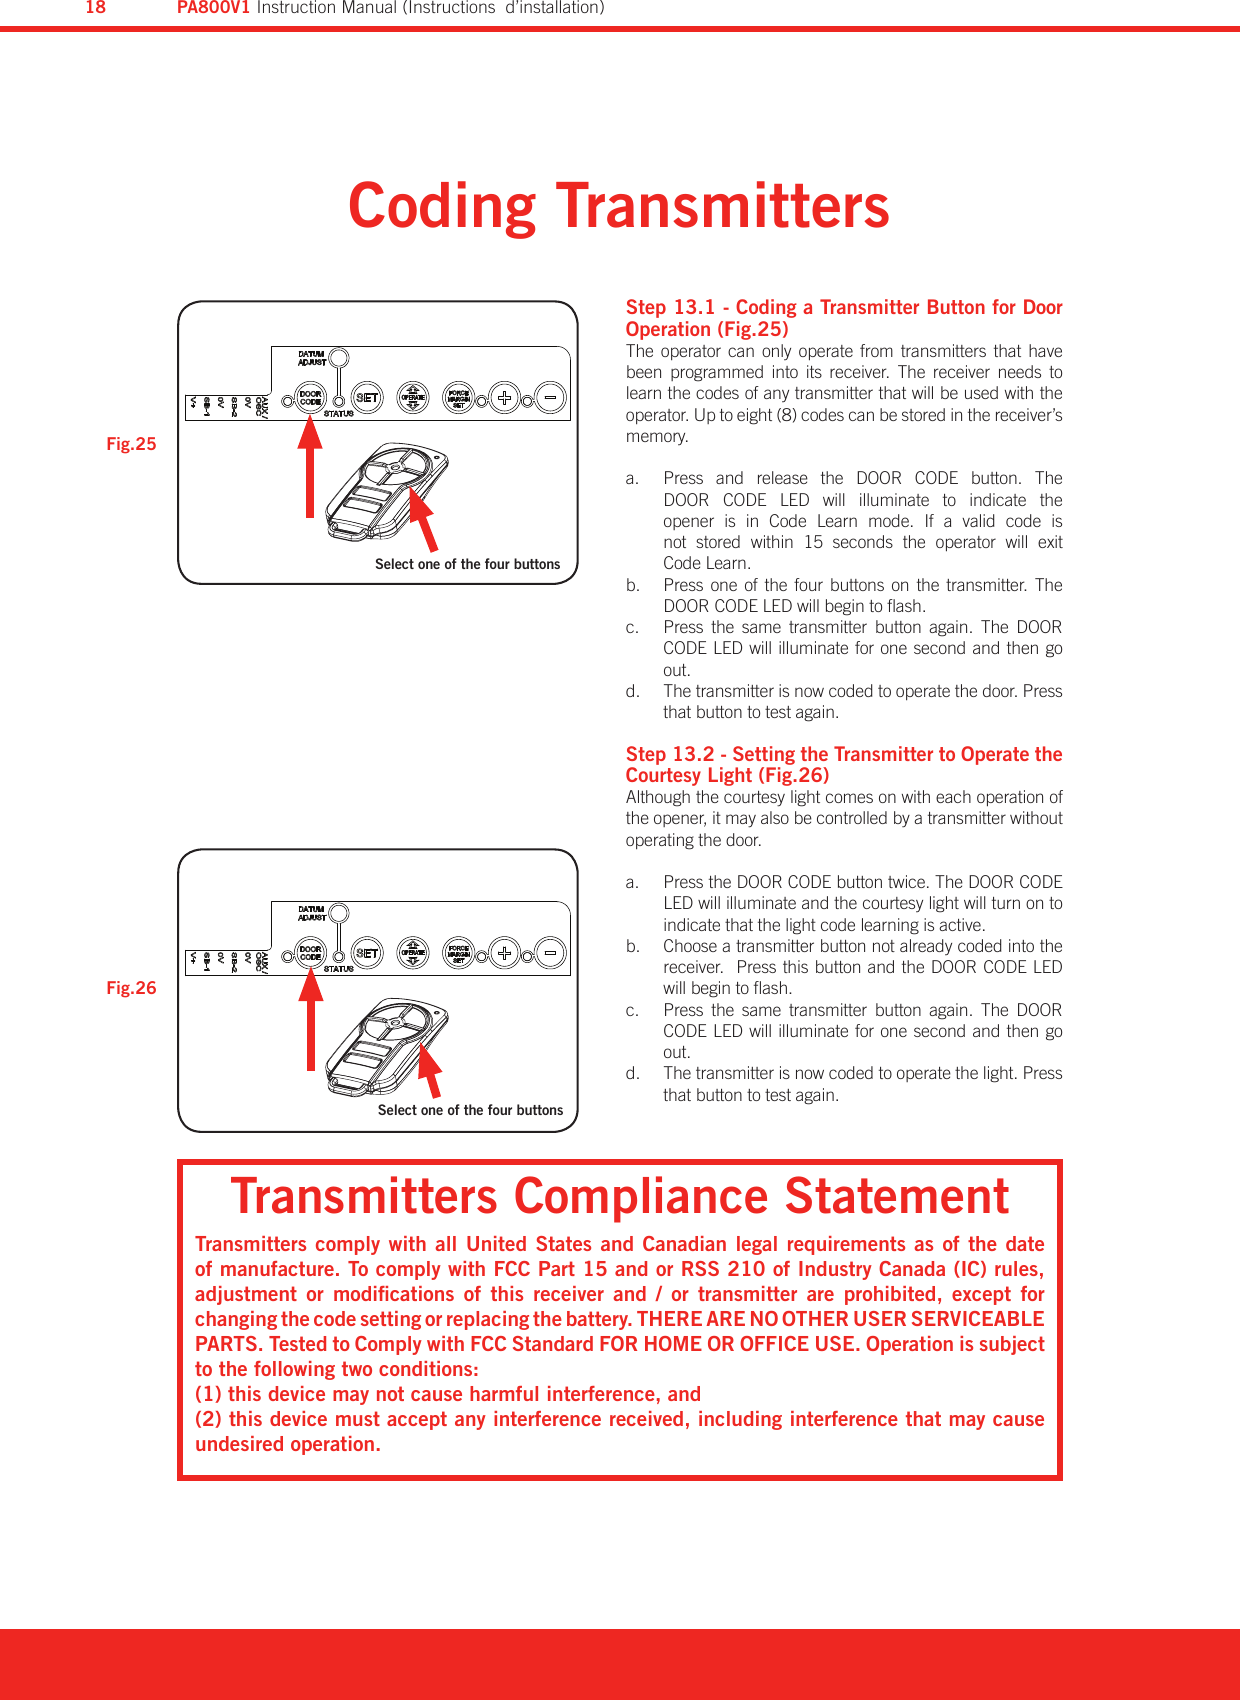 Coding TransmittersFig.25Fig.26Step 13.1 - Coding a Transmitter Button for Door Operation (Fig.25)The  operator  can  only  operate  from  transmitters  that  have been  programmed  into  its  receiver.  The  receiver  needs  to learn the codes of any transmitter that will be used with the operator. Up to eight (8) codes can be stored in the receiver’s memory.Press  and  release  the a.  DOOR  CODE  button.  The DOOR  CODE  LED  will  illuminate  to  indicate  the  opener  is  in  Code  Learn  mode.  If  a  valid  code  is not  stored  within  15  seconds  the  operator  will  exit  Code Learn.Press one of  the  four  buttons  on the  transmitter.  The b. DOOR CODE LED will begin to ash.Press  the  same  transmitter  button  again.  The  DOOR c. CODE LED will illuminate for one second and then go out.The transmitter is now coded to operate the door. Press d. that button to test again.Step 13.2 - Setting the Transmitter to Operate the Courtesy Light (Fig.26)Although the courtesy light comes on with each operation of the opener, it may also be controlled by a transmitter without operating the door.Press the a.  DOOR CODE button twice. The DOOR CODE LED will illuminate and the courtesy light will turn on to indicate that the light code learning is active.Choose a transmitter button not already coded into the b. receiver.  Press this button and the DOOR CODE LED will begin to ash.Press  the  same  transmitter  button  again.  The  DOOR c. CODE LED will illuminate for one second and then go out.The transmitter is now coded to operate the light. Press d. that button to test again.Transmitters Compliance StatementTransmitters  comply  with all United  States and Canadian legal  requirements as of  the date of manufacture. To comply with FCC Part 15 and or RSS 210 of Industry Canada (IC) rules, adjustment  or  modications  of  this  receiver  and  /  or  transmitter  are  prohibited,  except  for changing the code setting or replacing the battery. THERE ARE NO OTHER USER SERVICEABLE PARTS. Tested to Comply with FCC Standard FOR HOME OR OFFICE USE. Operation is subject to the following two conditions:(1) this device may not cause harmful interference, and(2) this device must accept any interference received, including interference that may cause undesired operation.Select one of the four buttonsSelect one of the four buttonsPA800V1 Instruction Manual (Instructions  d’installation)18